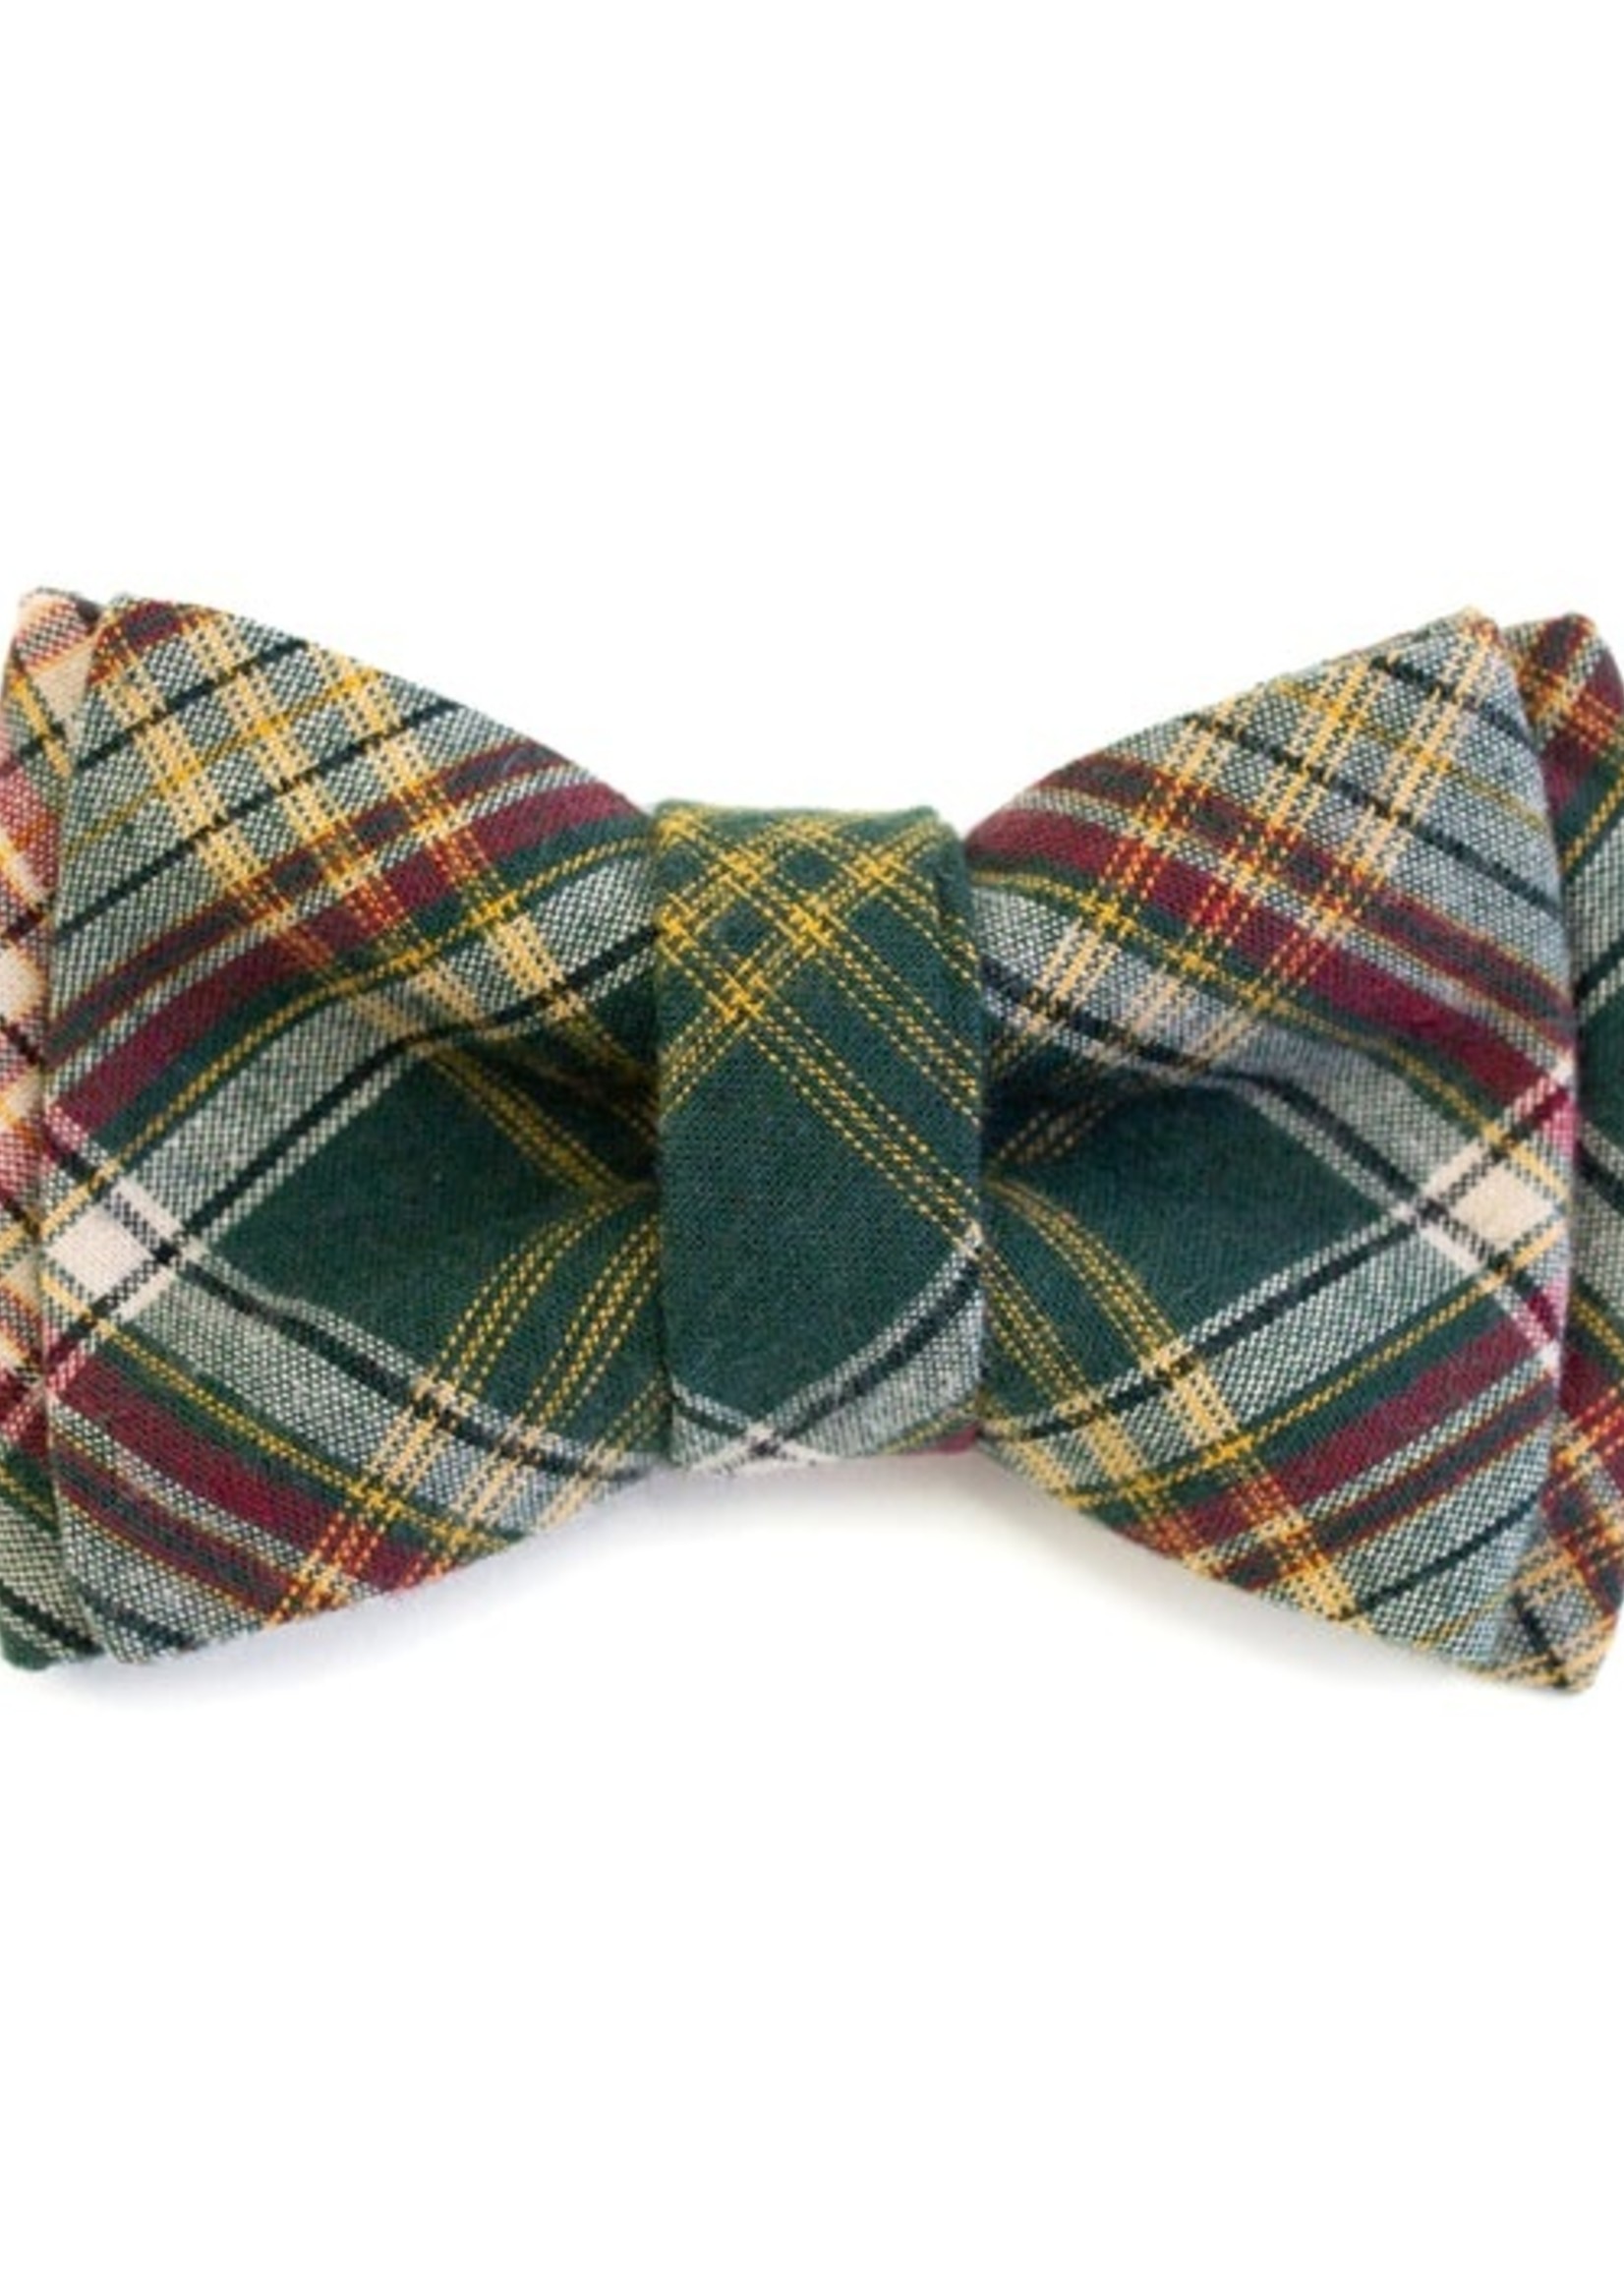 Eat Play Wag Eat Play Wag - Pine Bow Tie